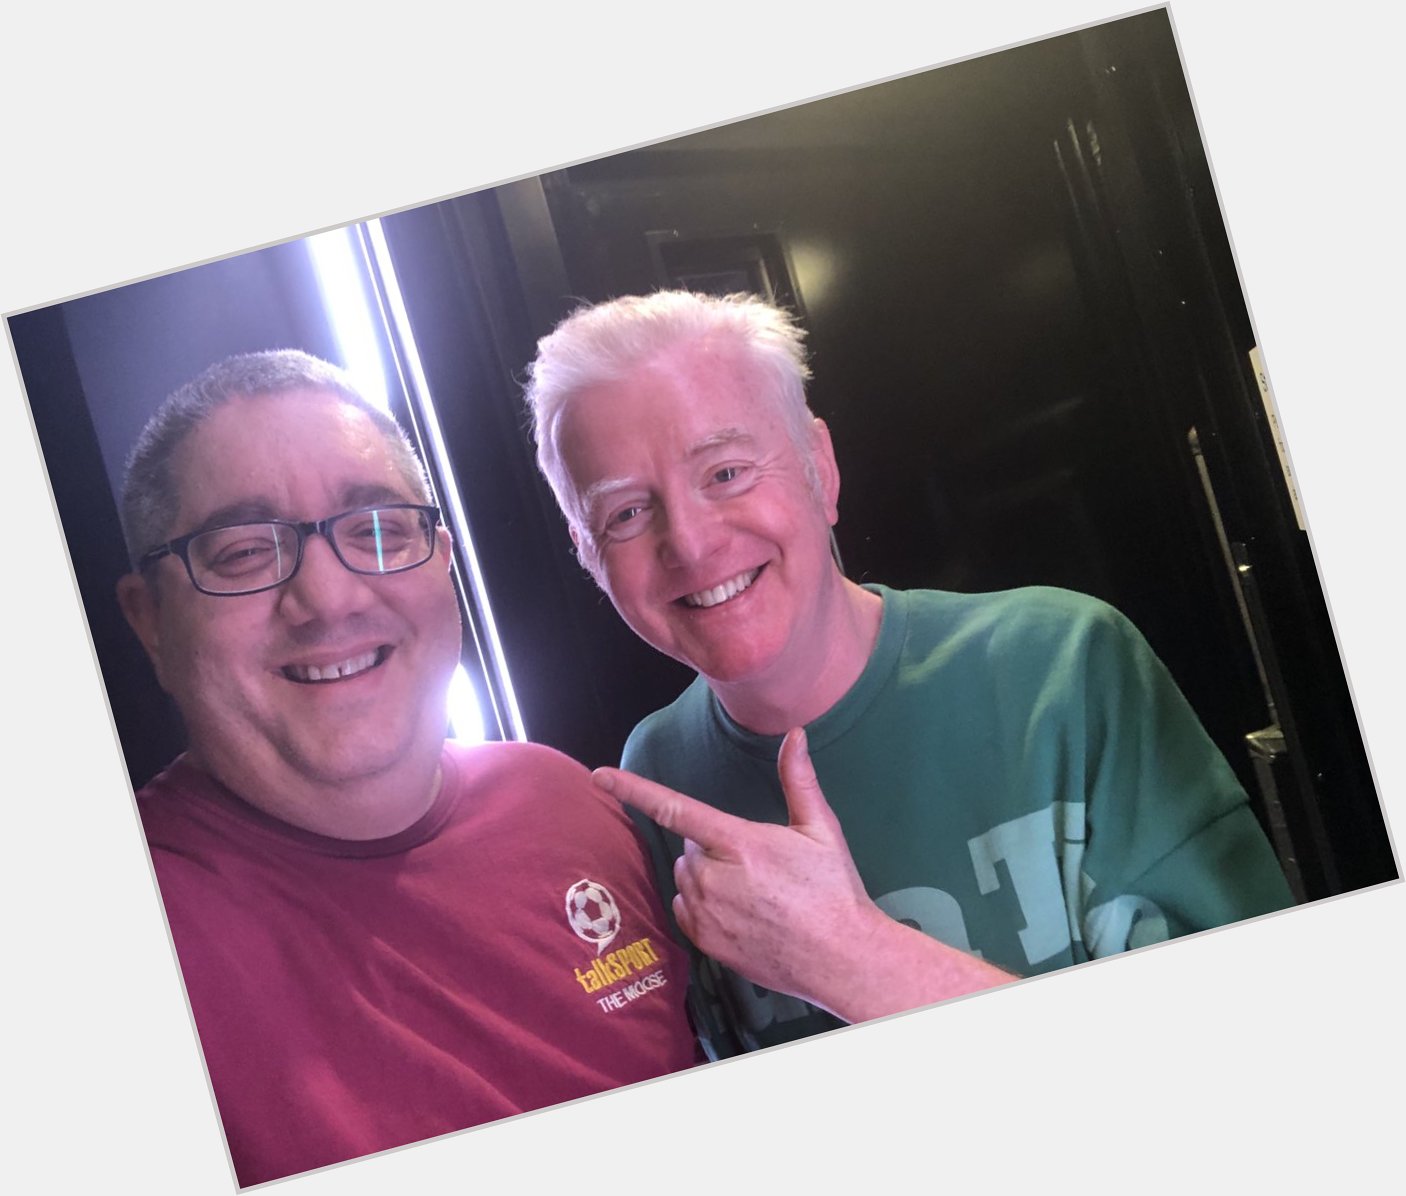 Happy 56th Birthday Breakfast Show host Chris Evans, have a great day my friend 